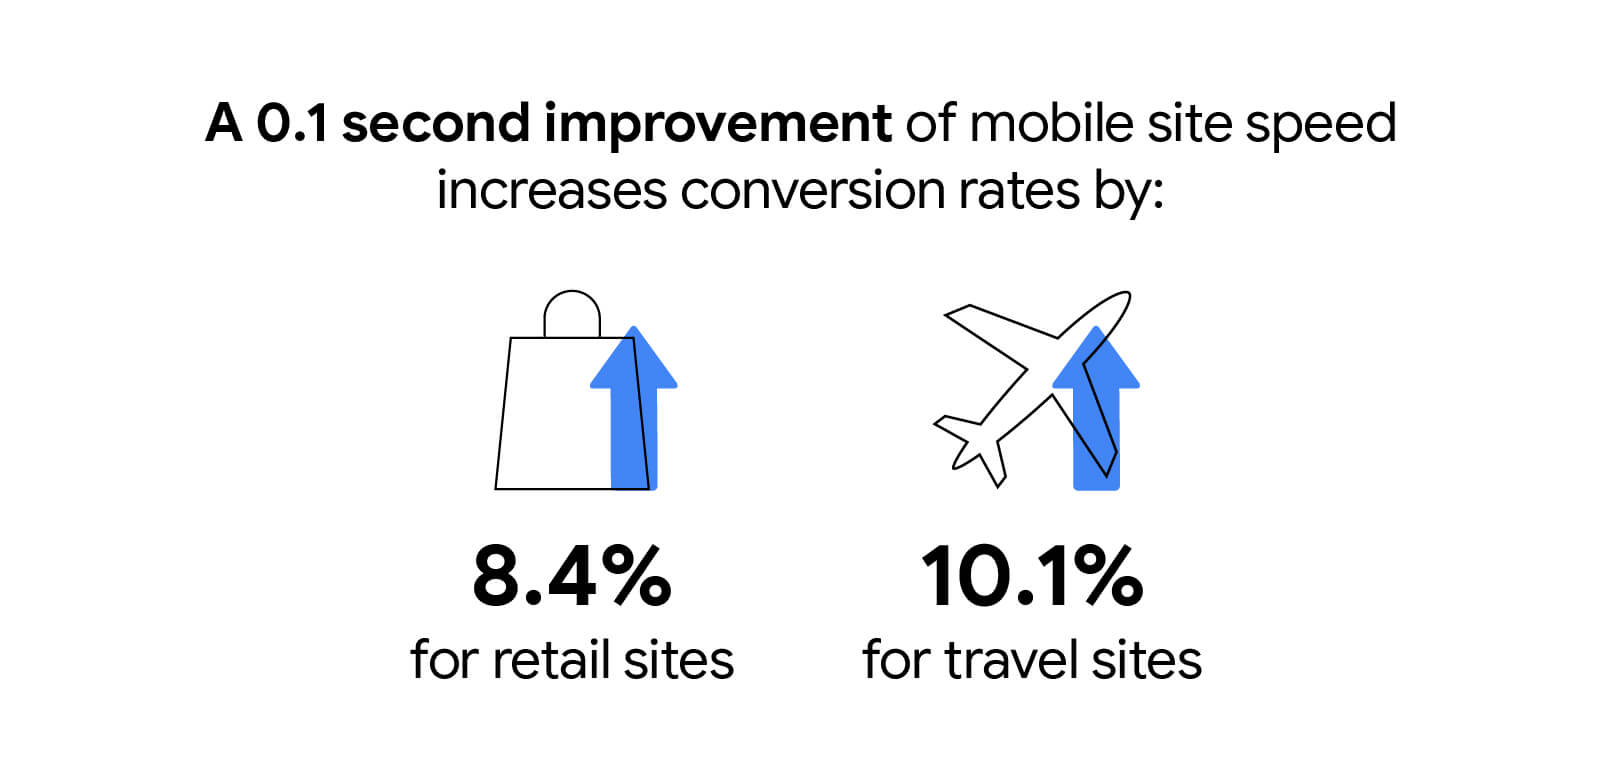 A 0.1 second improvement of mobile site speed increases conversion rates by 8.4% for retail sites and 10.1% for travel sites.